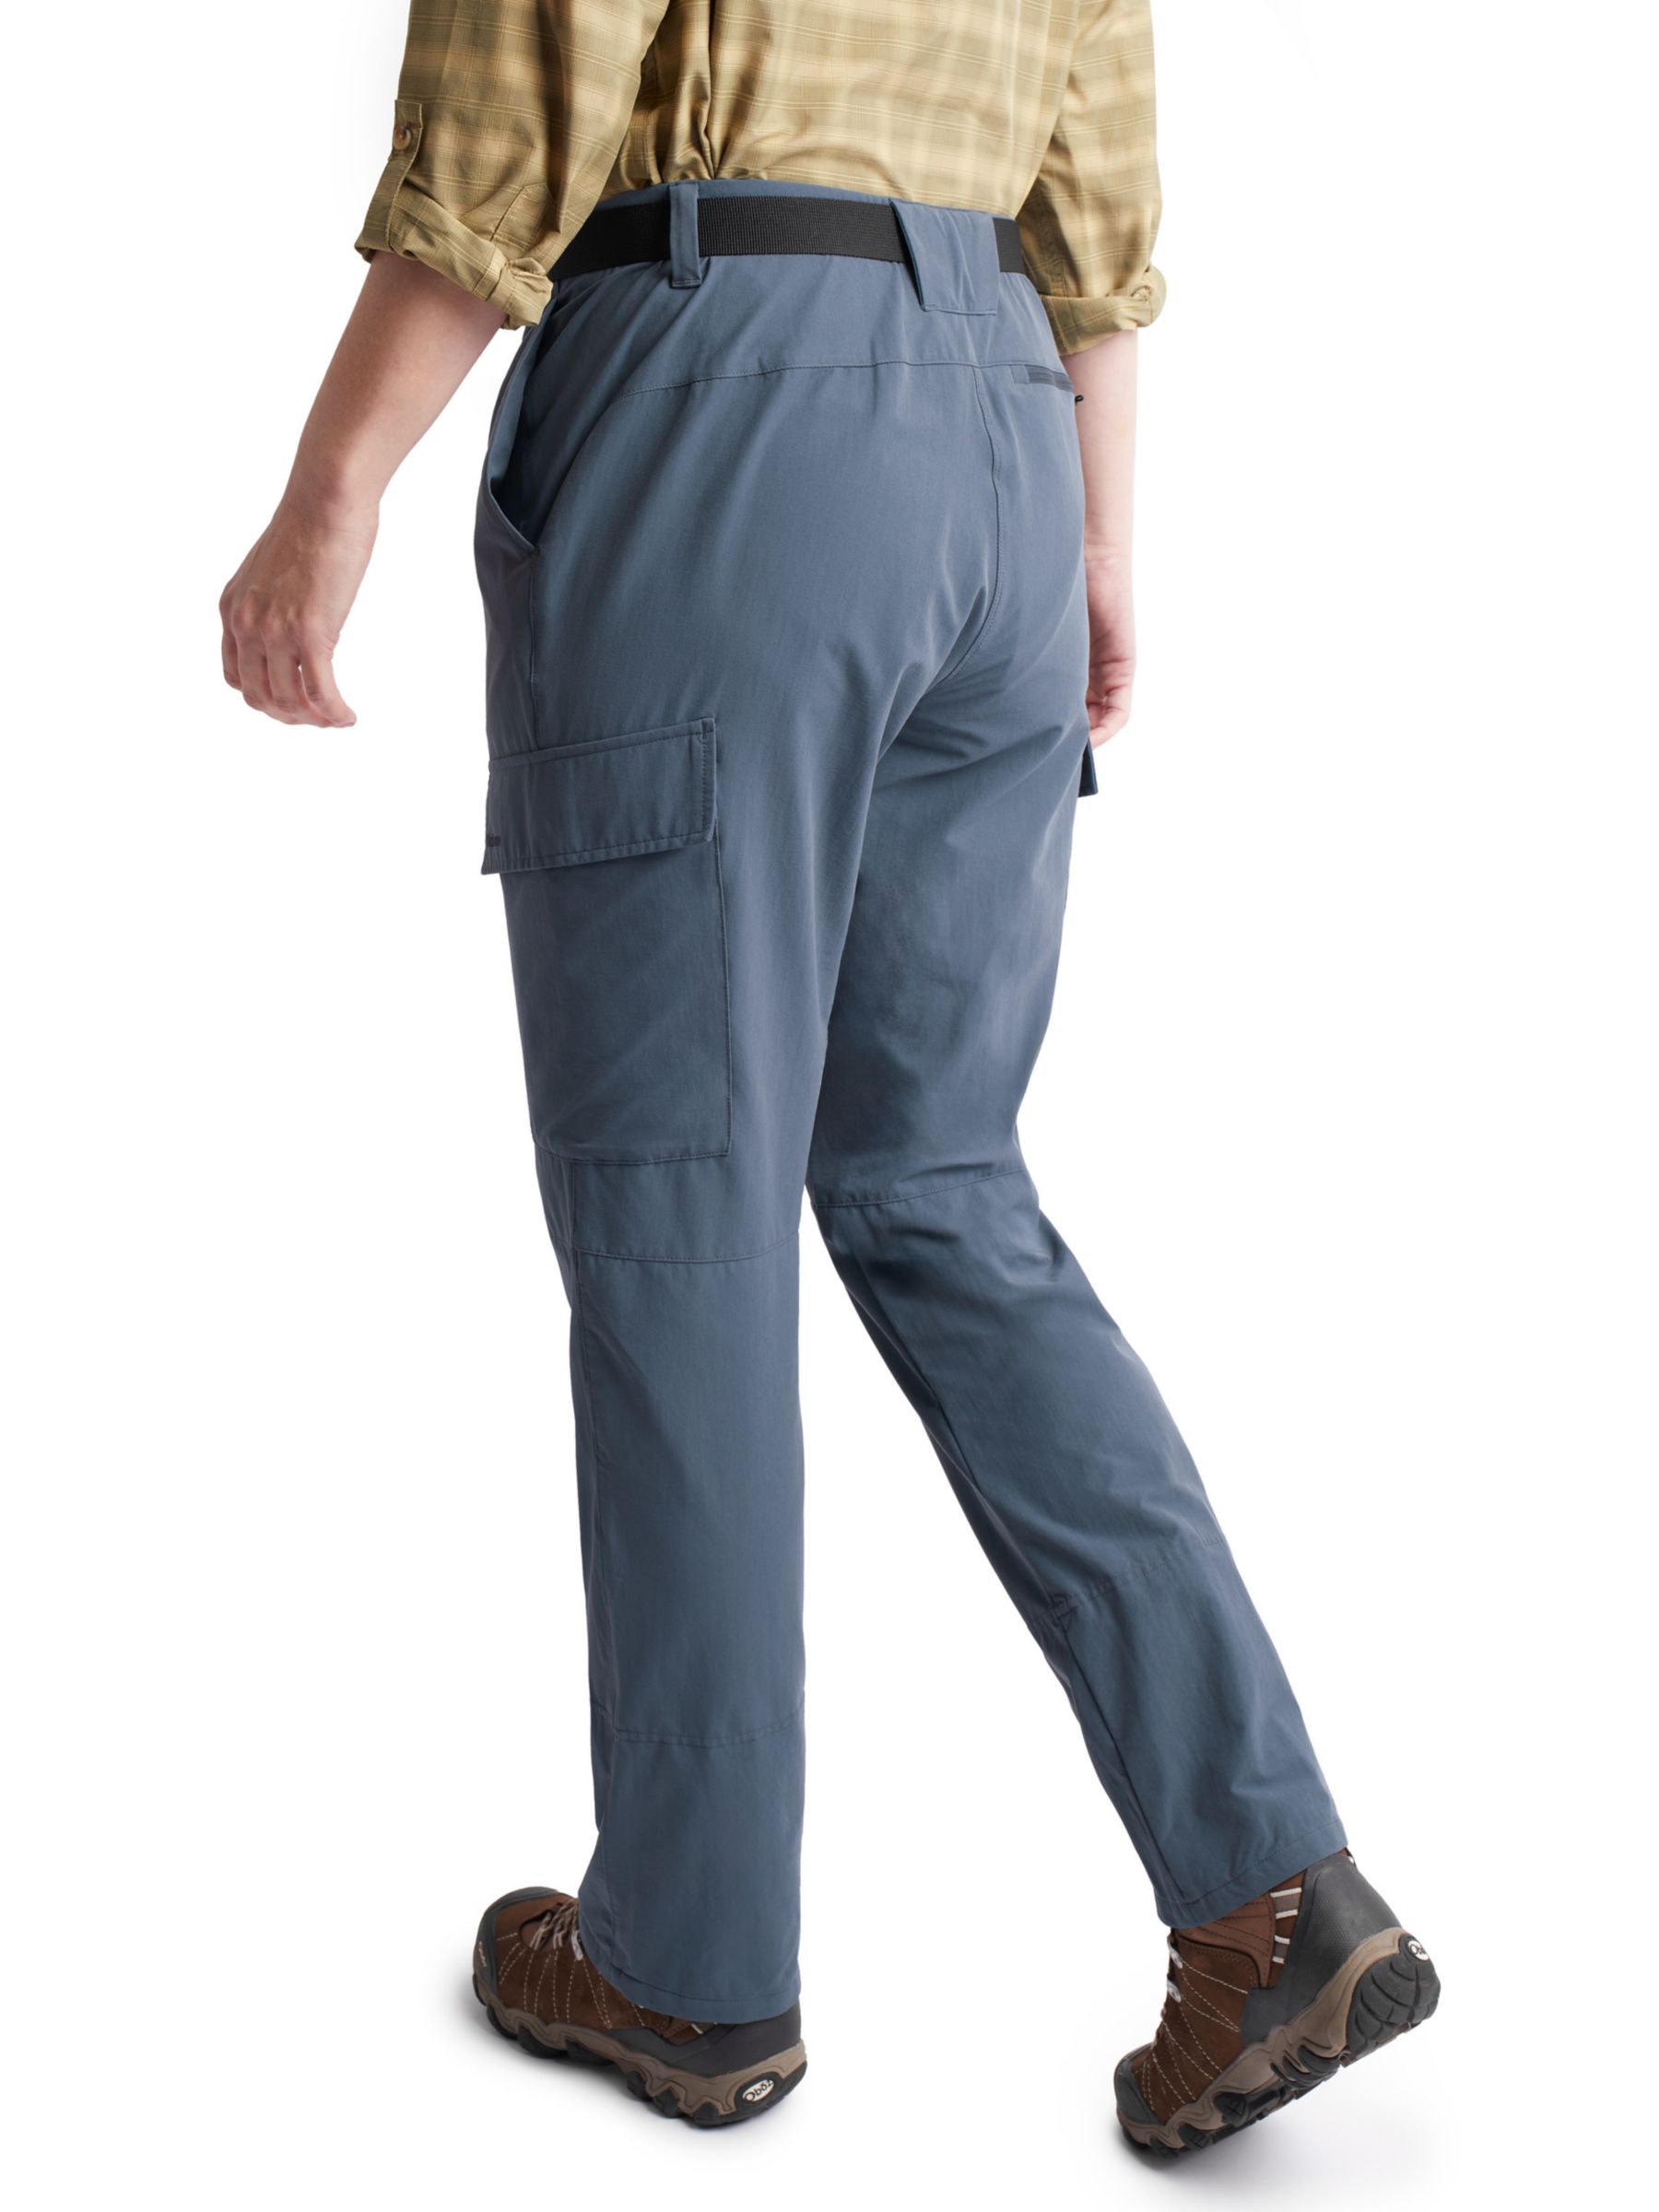 Buy Rohan Savannah Anti-Insect Expedition Trousers Online at johnlewis.com